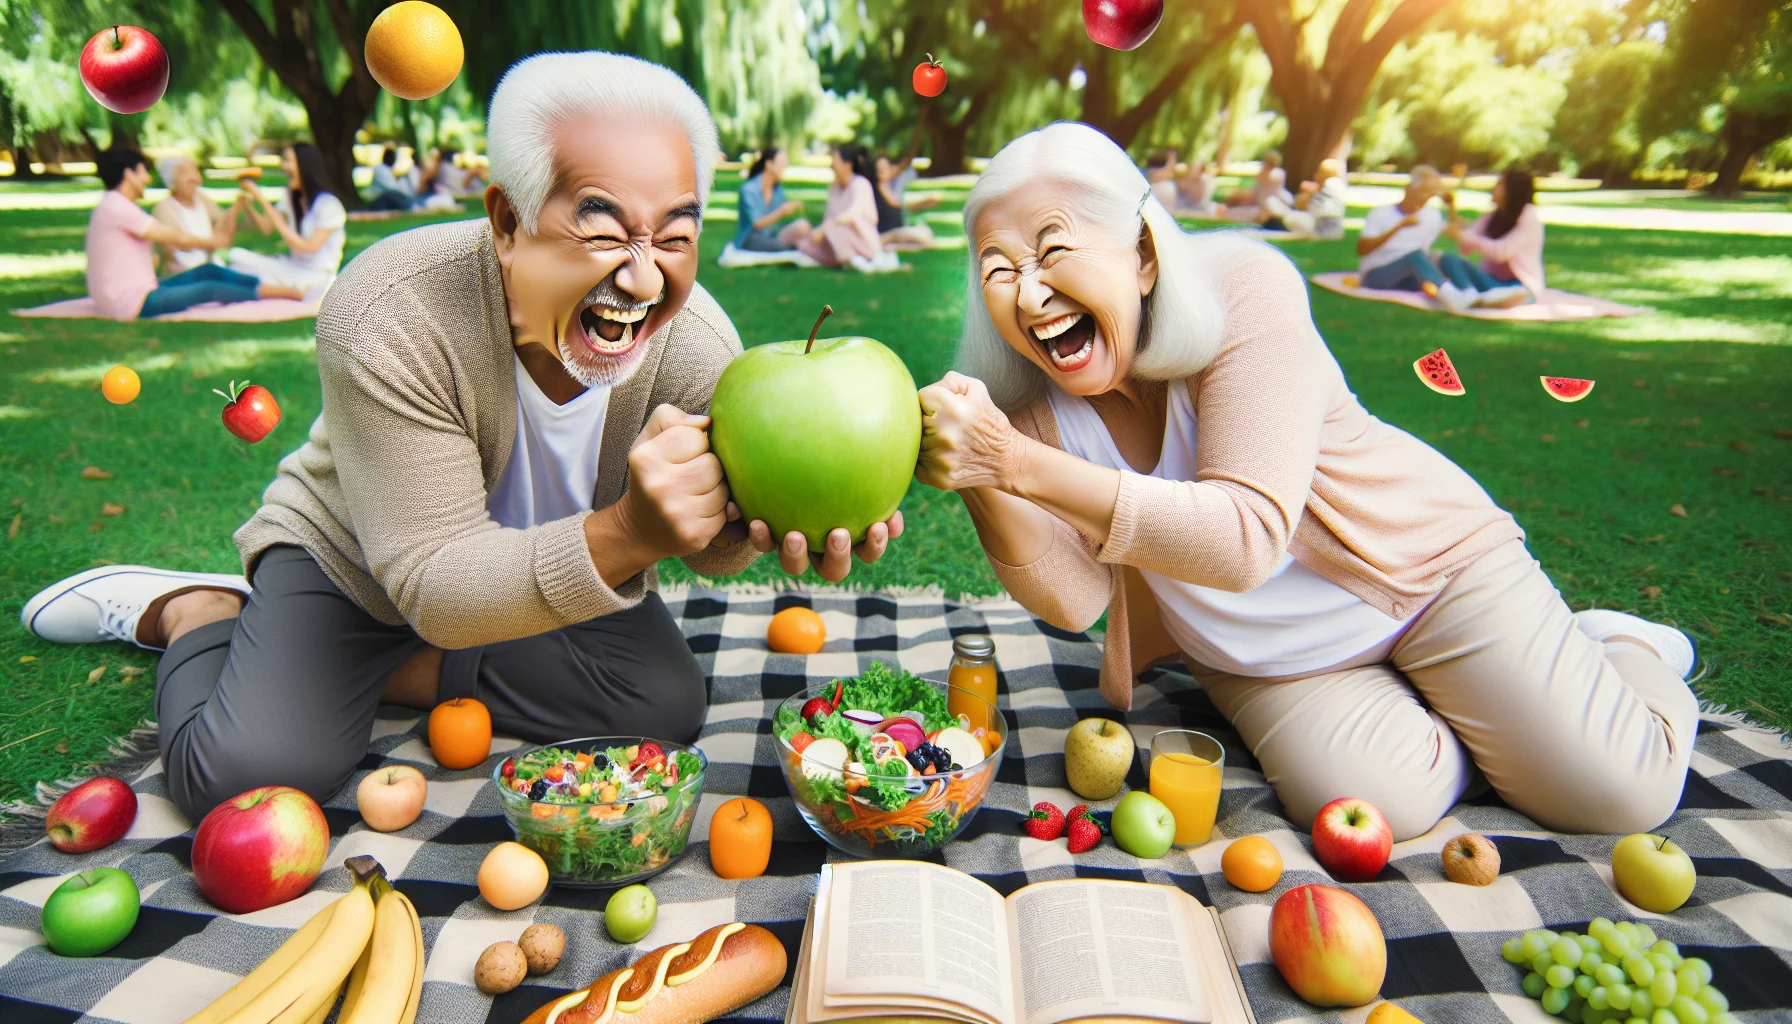 Picture this amusing yet relatable scenario: An Asian elderly man and a Caucasian elderly woman are in a lively park having a picnic. They are seemingly having an animated tug-of-war match over a large, ripe apple, both laughing heartily with their eyes twinkling. Various fruits, vegetables, and healthy snacks are scattered everywhere around them, some even floating above their heads as if in motion. There's an open book titled 'Diets for the Golden Years' lying on the picnic blanket beside a colorful salad. Their energetic expressions and vitality are infectious, showcasing that fruits and age are no barriers to health and energy.